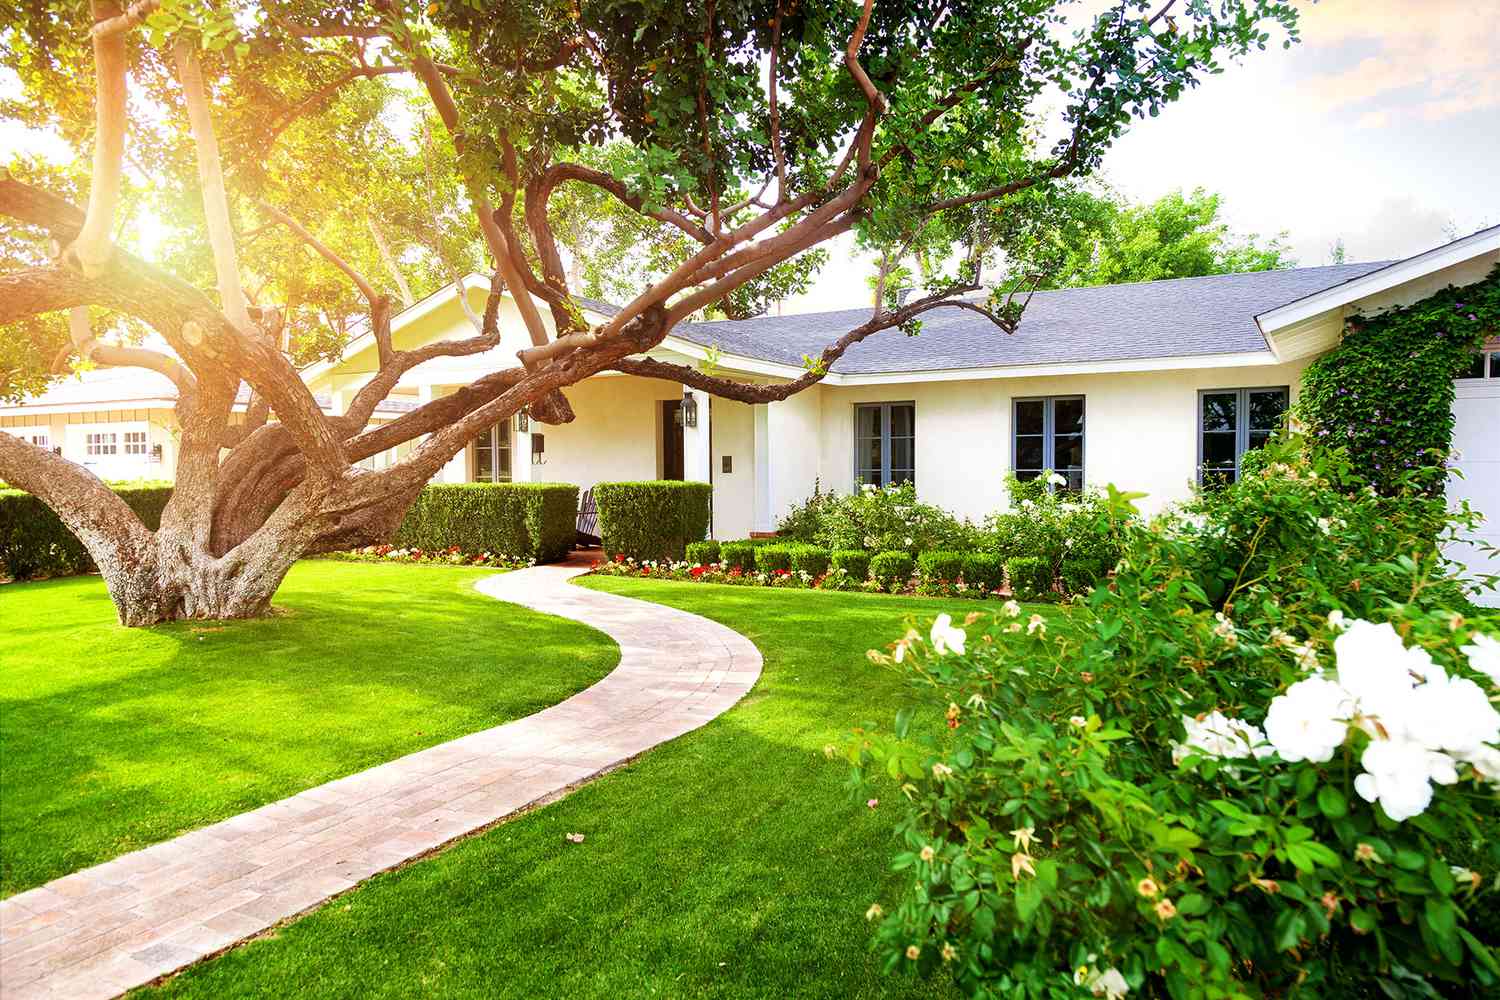 Trees add value to home